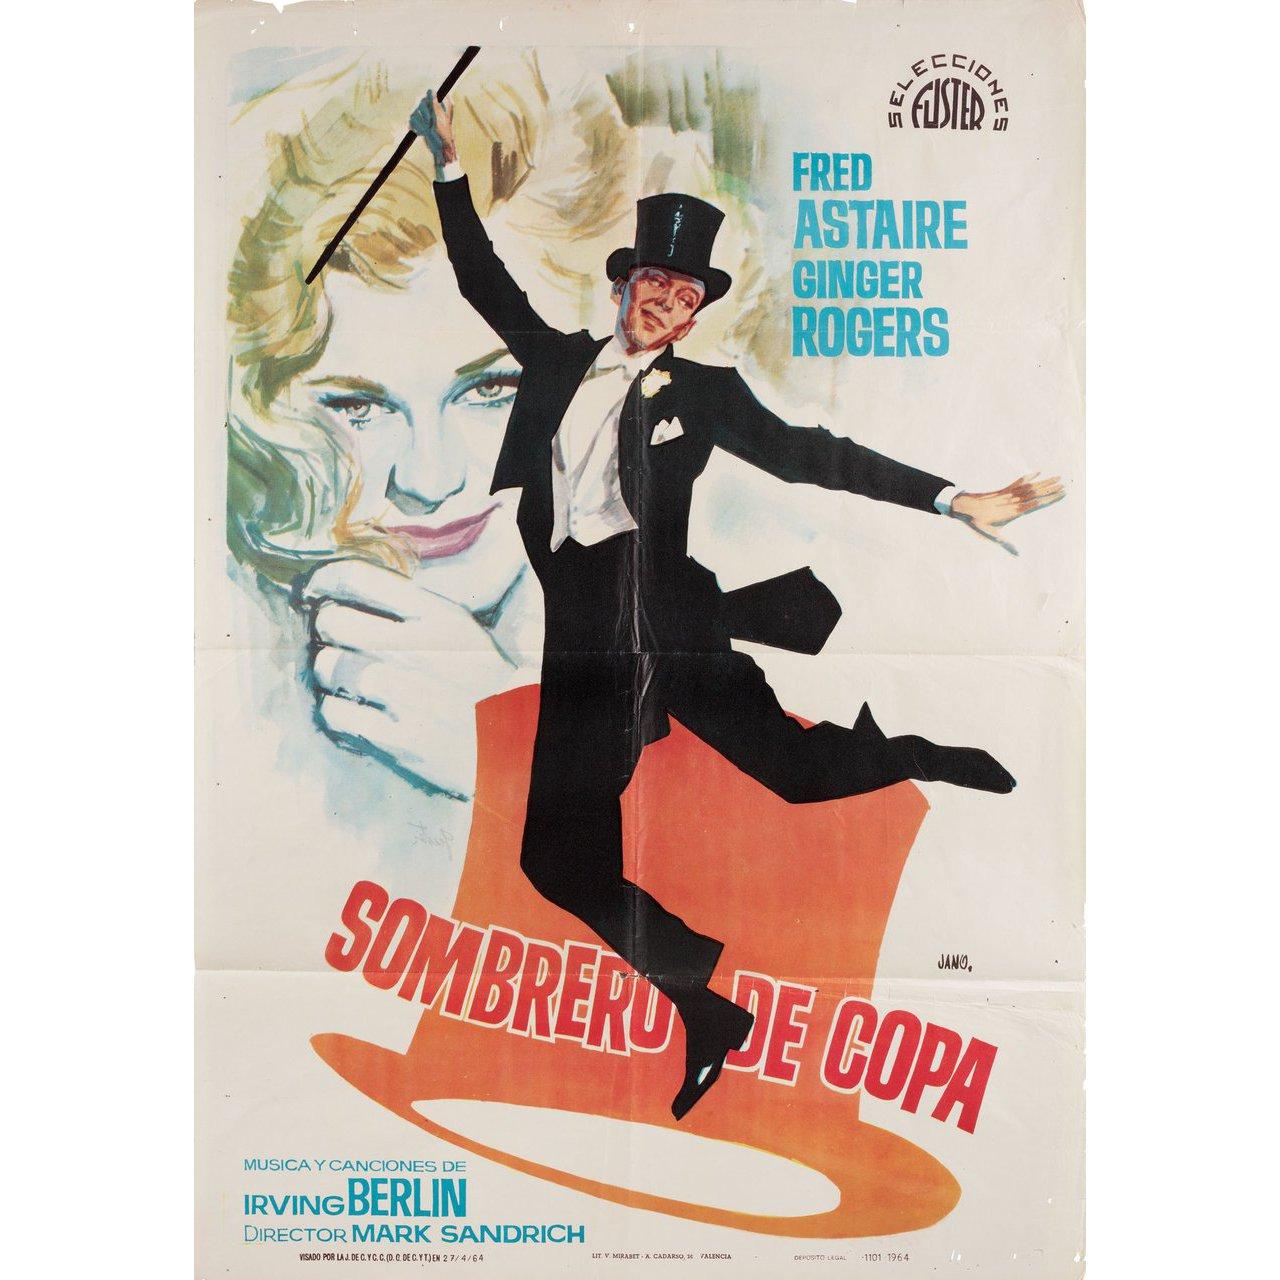 Original 1964 re-release Spanish B1 poster by Jano for the 1935 film Top Hat directed by Mark Sandrich with Fred Astaire / Ginger Rogers / Edward Everett Horton / Erik Rhodes. Good-Very Good condition, folded with bleed through. Many original